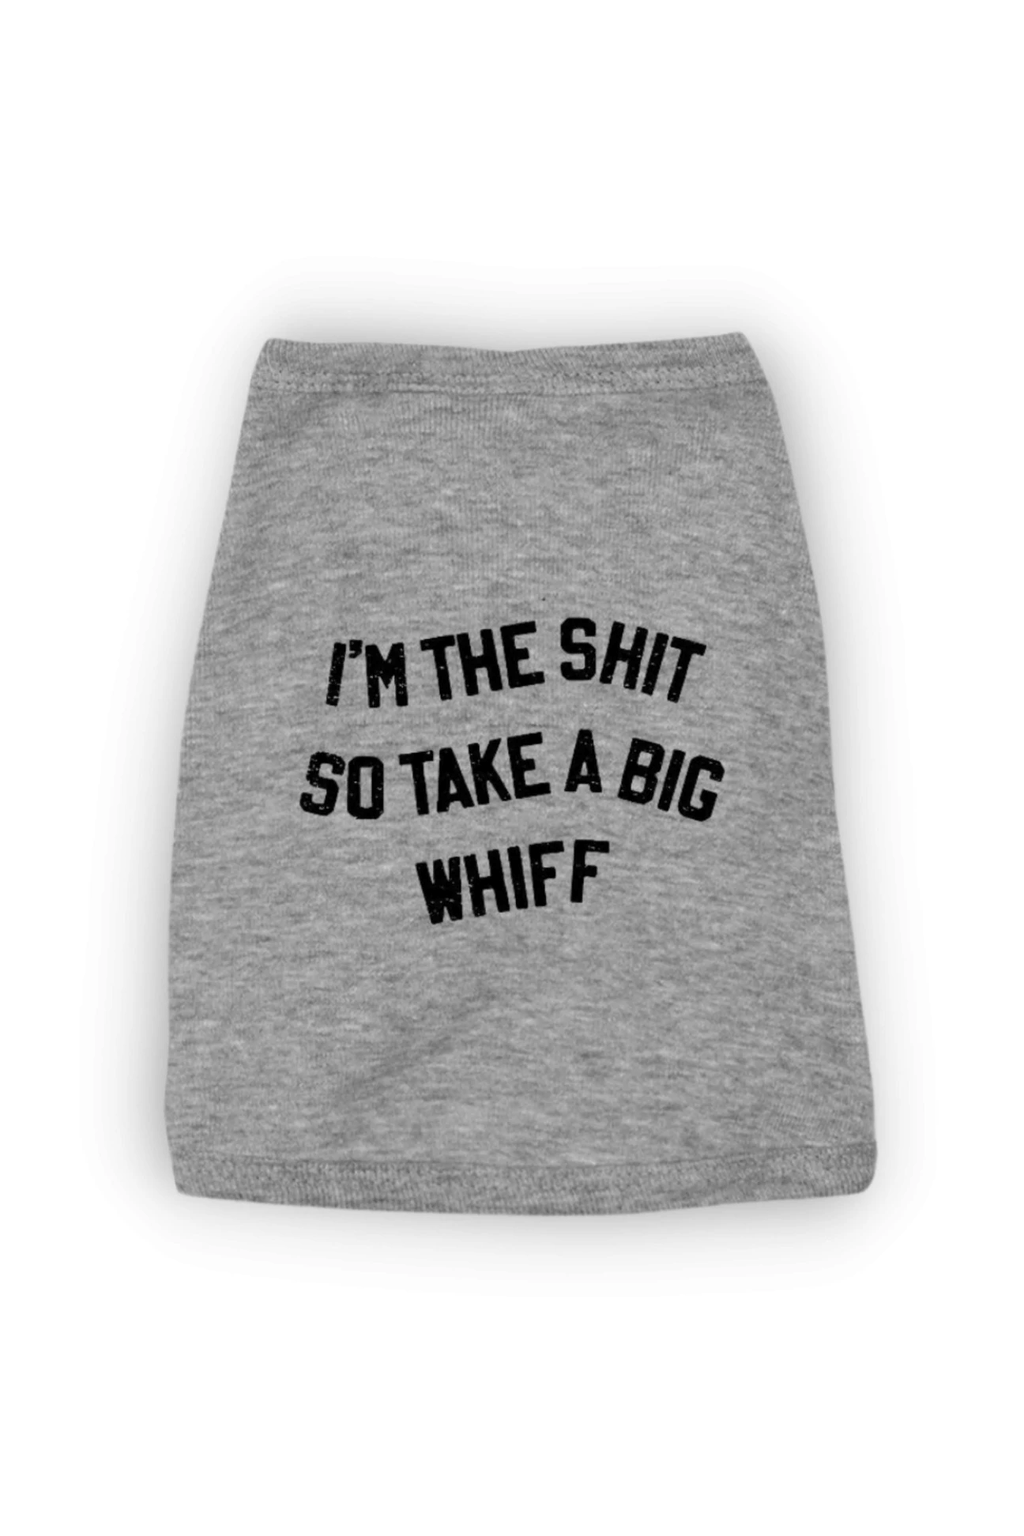 I'm The Shit, So Take A Big Whiff Dog Graphic Tee